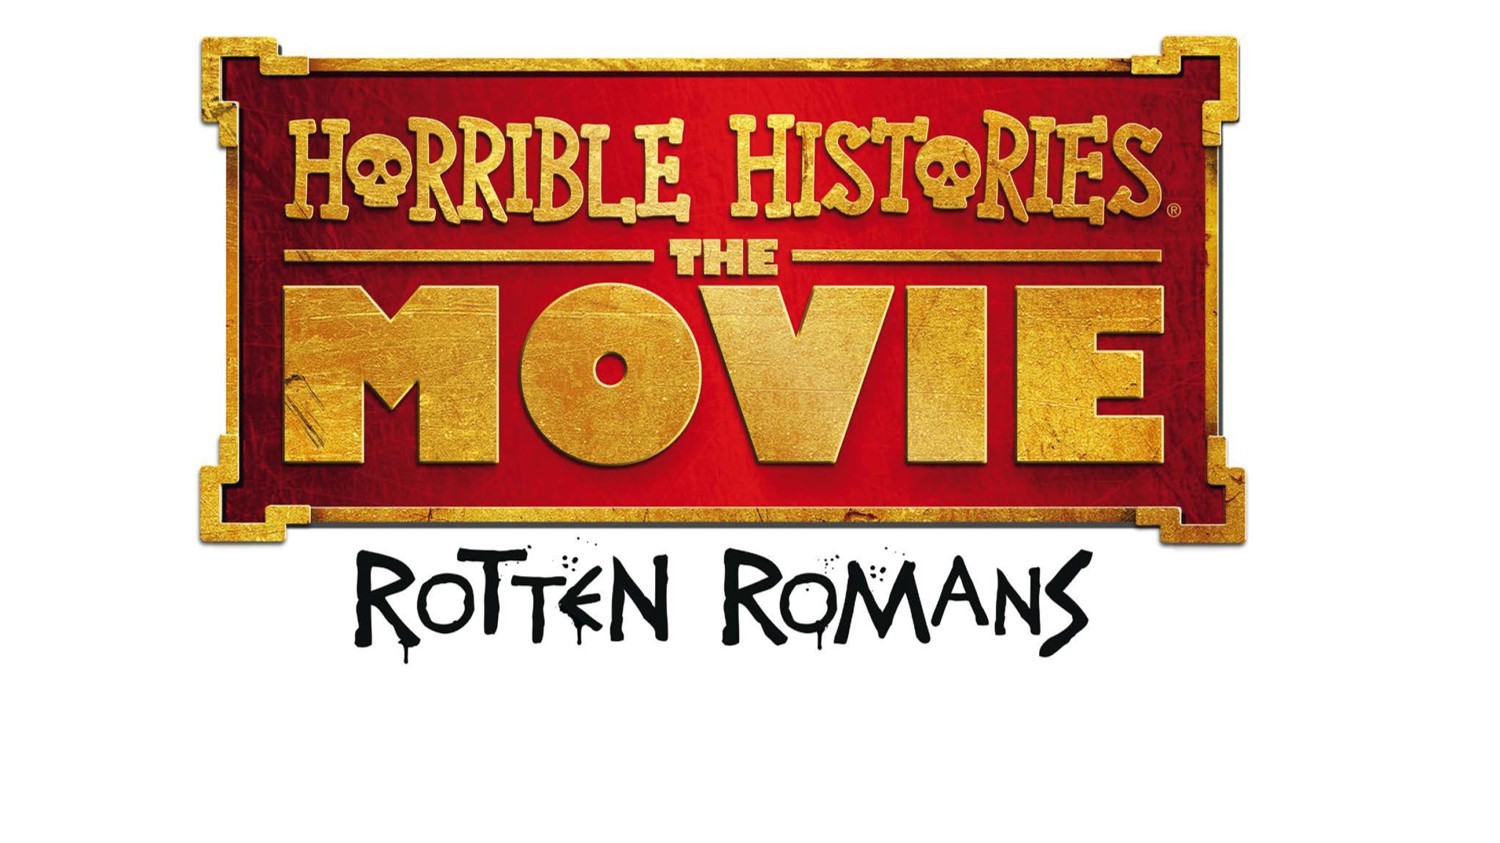 Watch Horrible Histories: The Movie - Rotten Romans